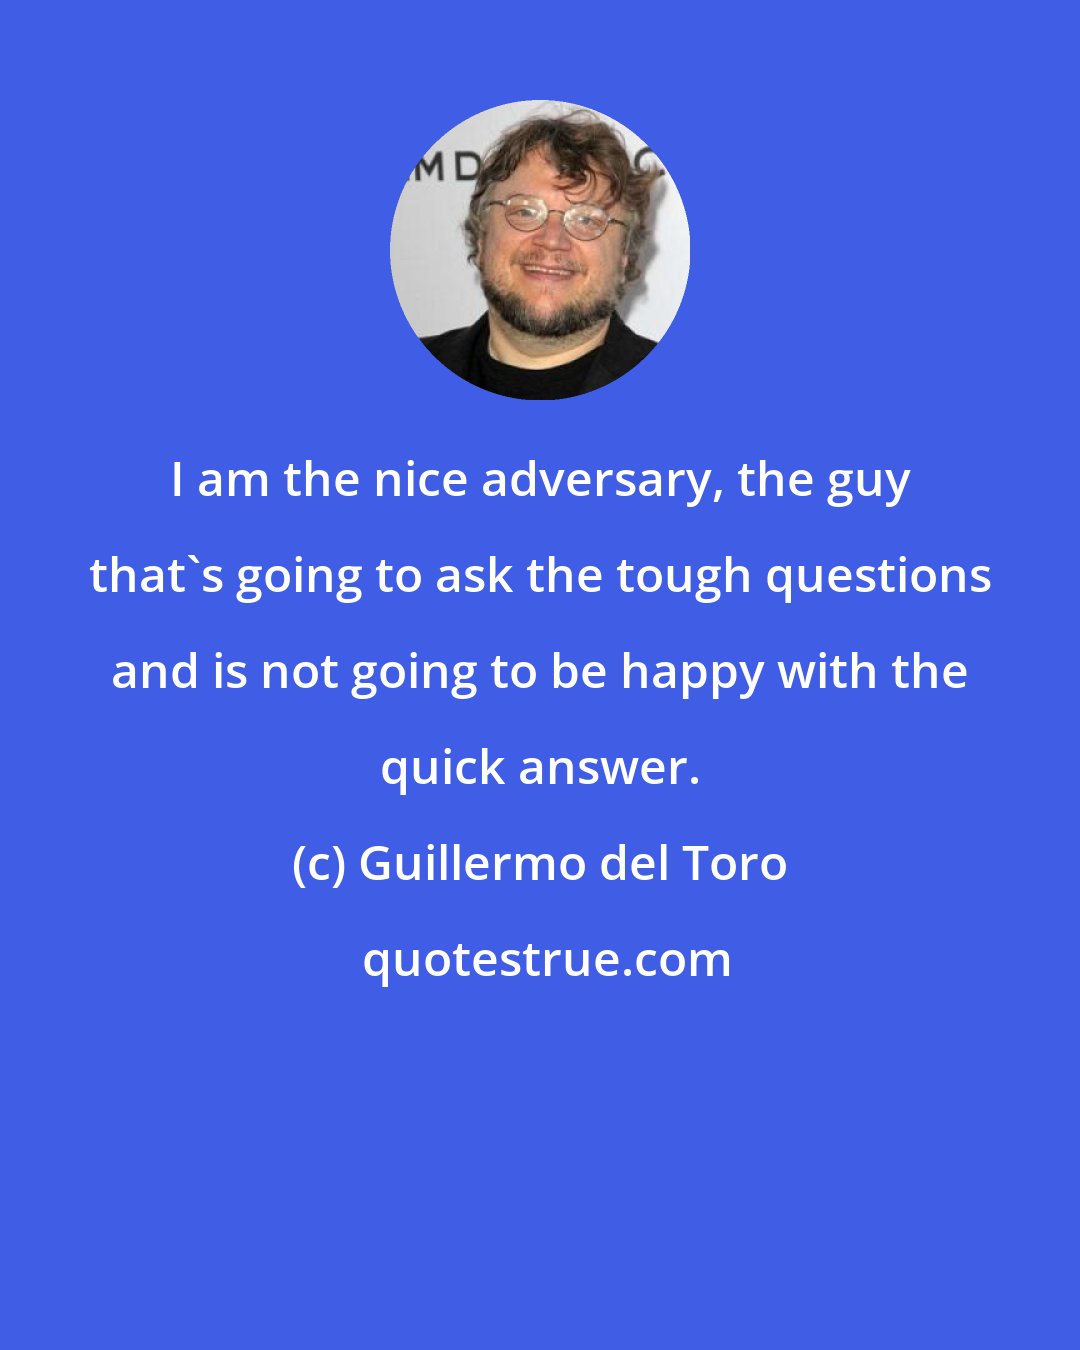 Guillermo del Toro: I am the nice adversary, the guy that's going to ask the tough questions and is not going to be happy with the quick answer.